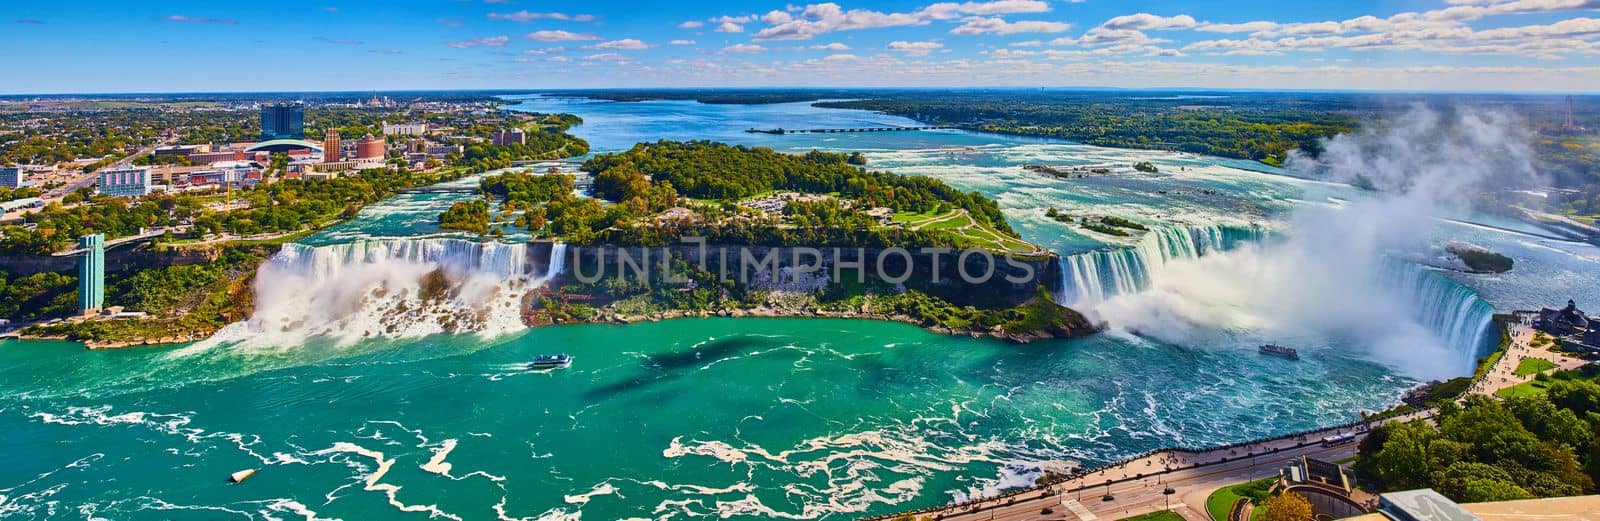 Wide panorama of entire Niagara Falls from Canada side overlook by njproductions